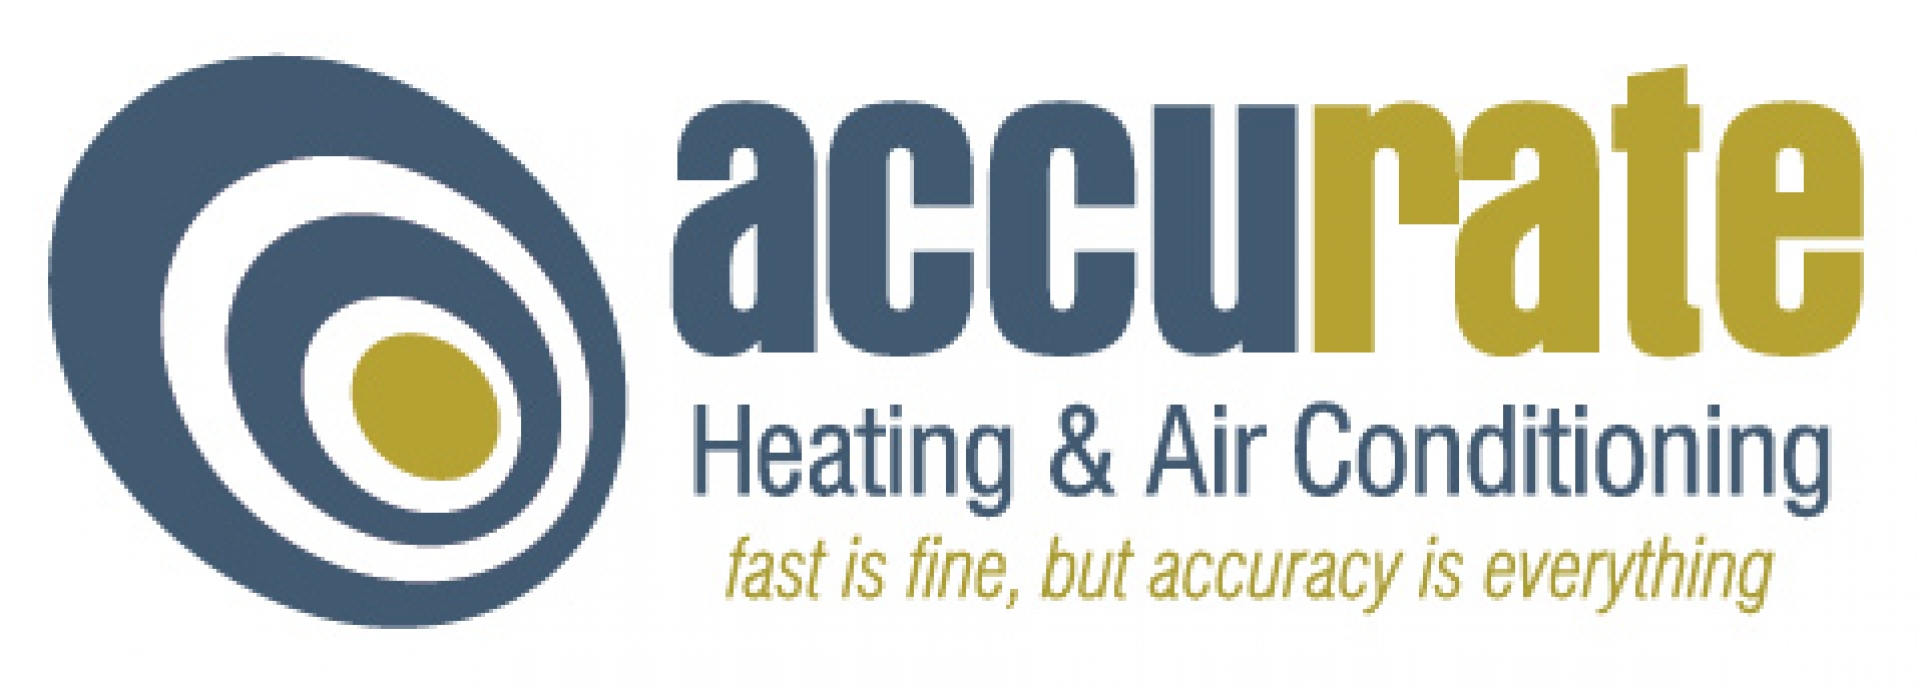 Accurate Heating & Air Conditioning company logo